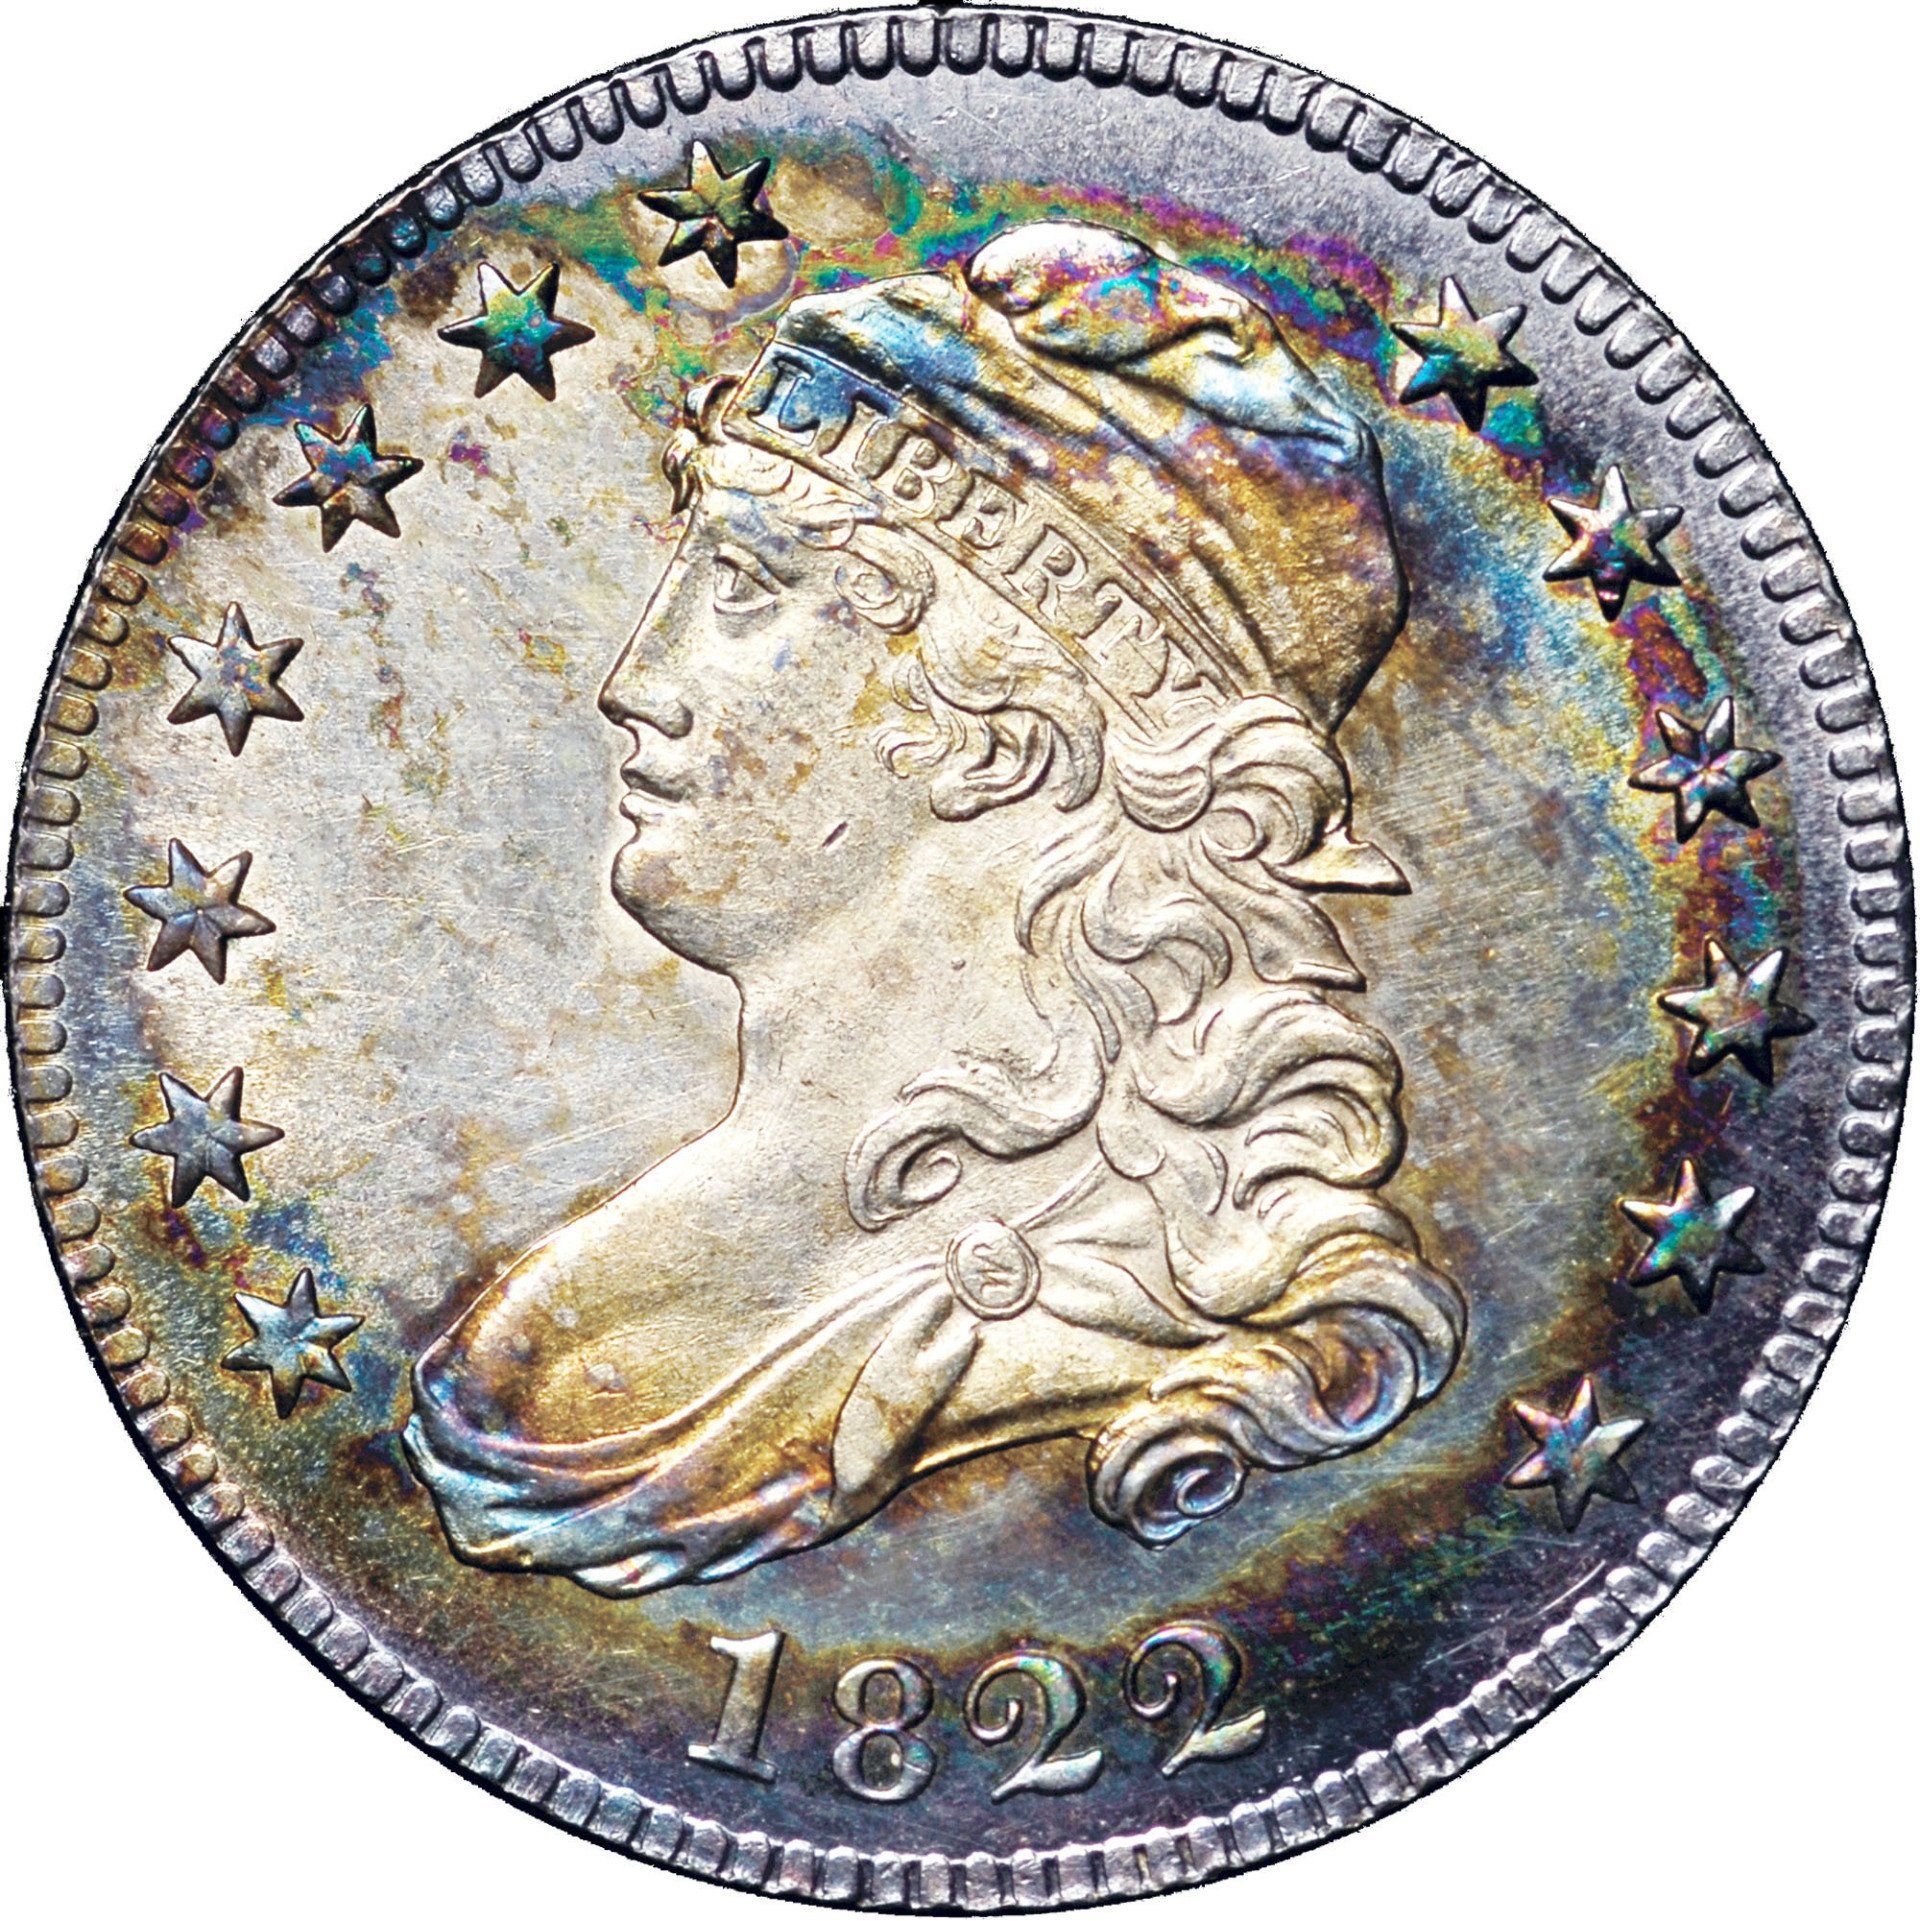 1822 Capped Bust Quarter image courtesy of NGC